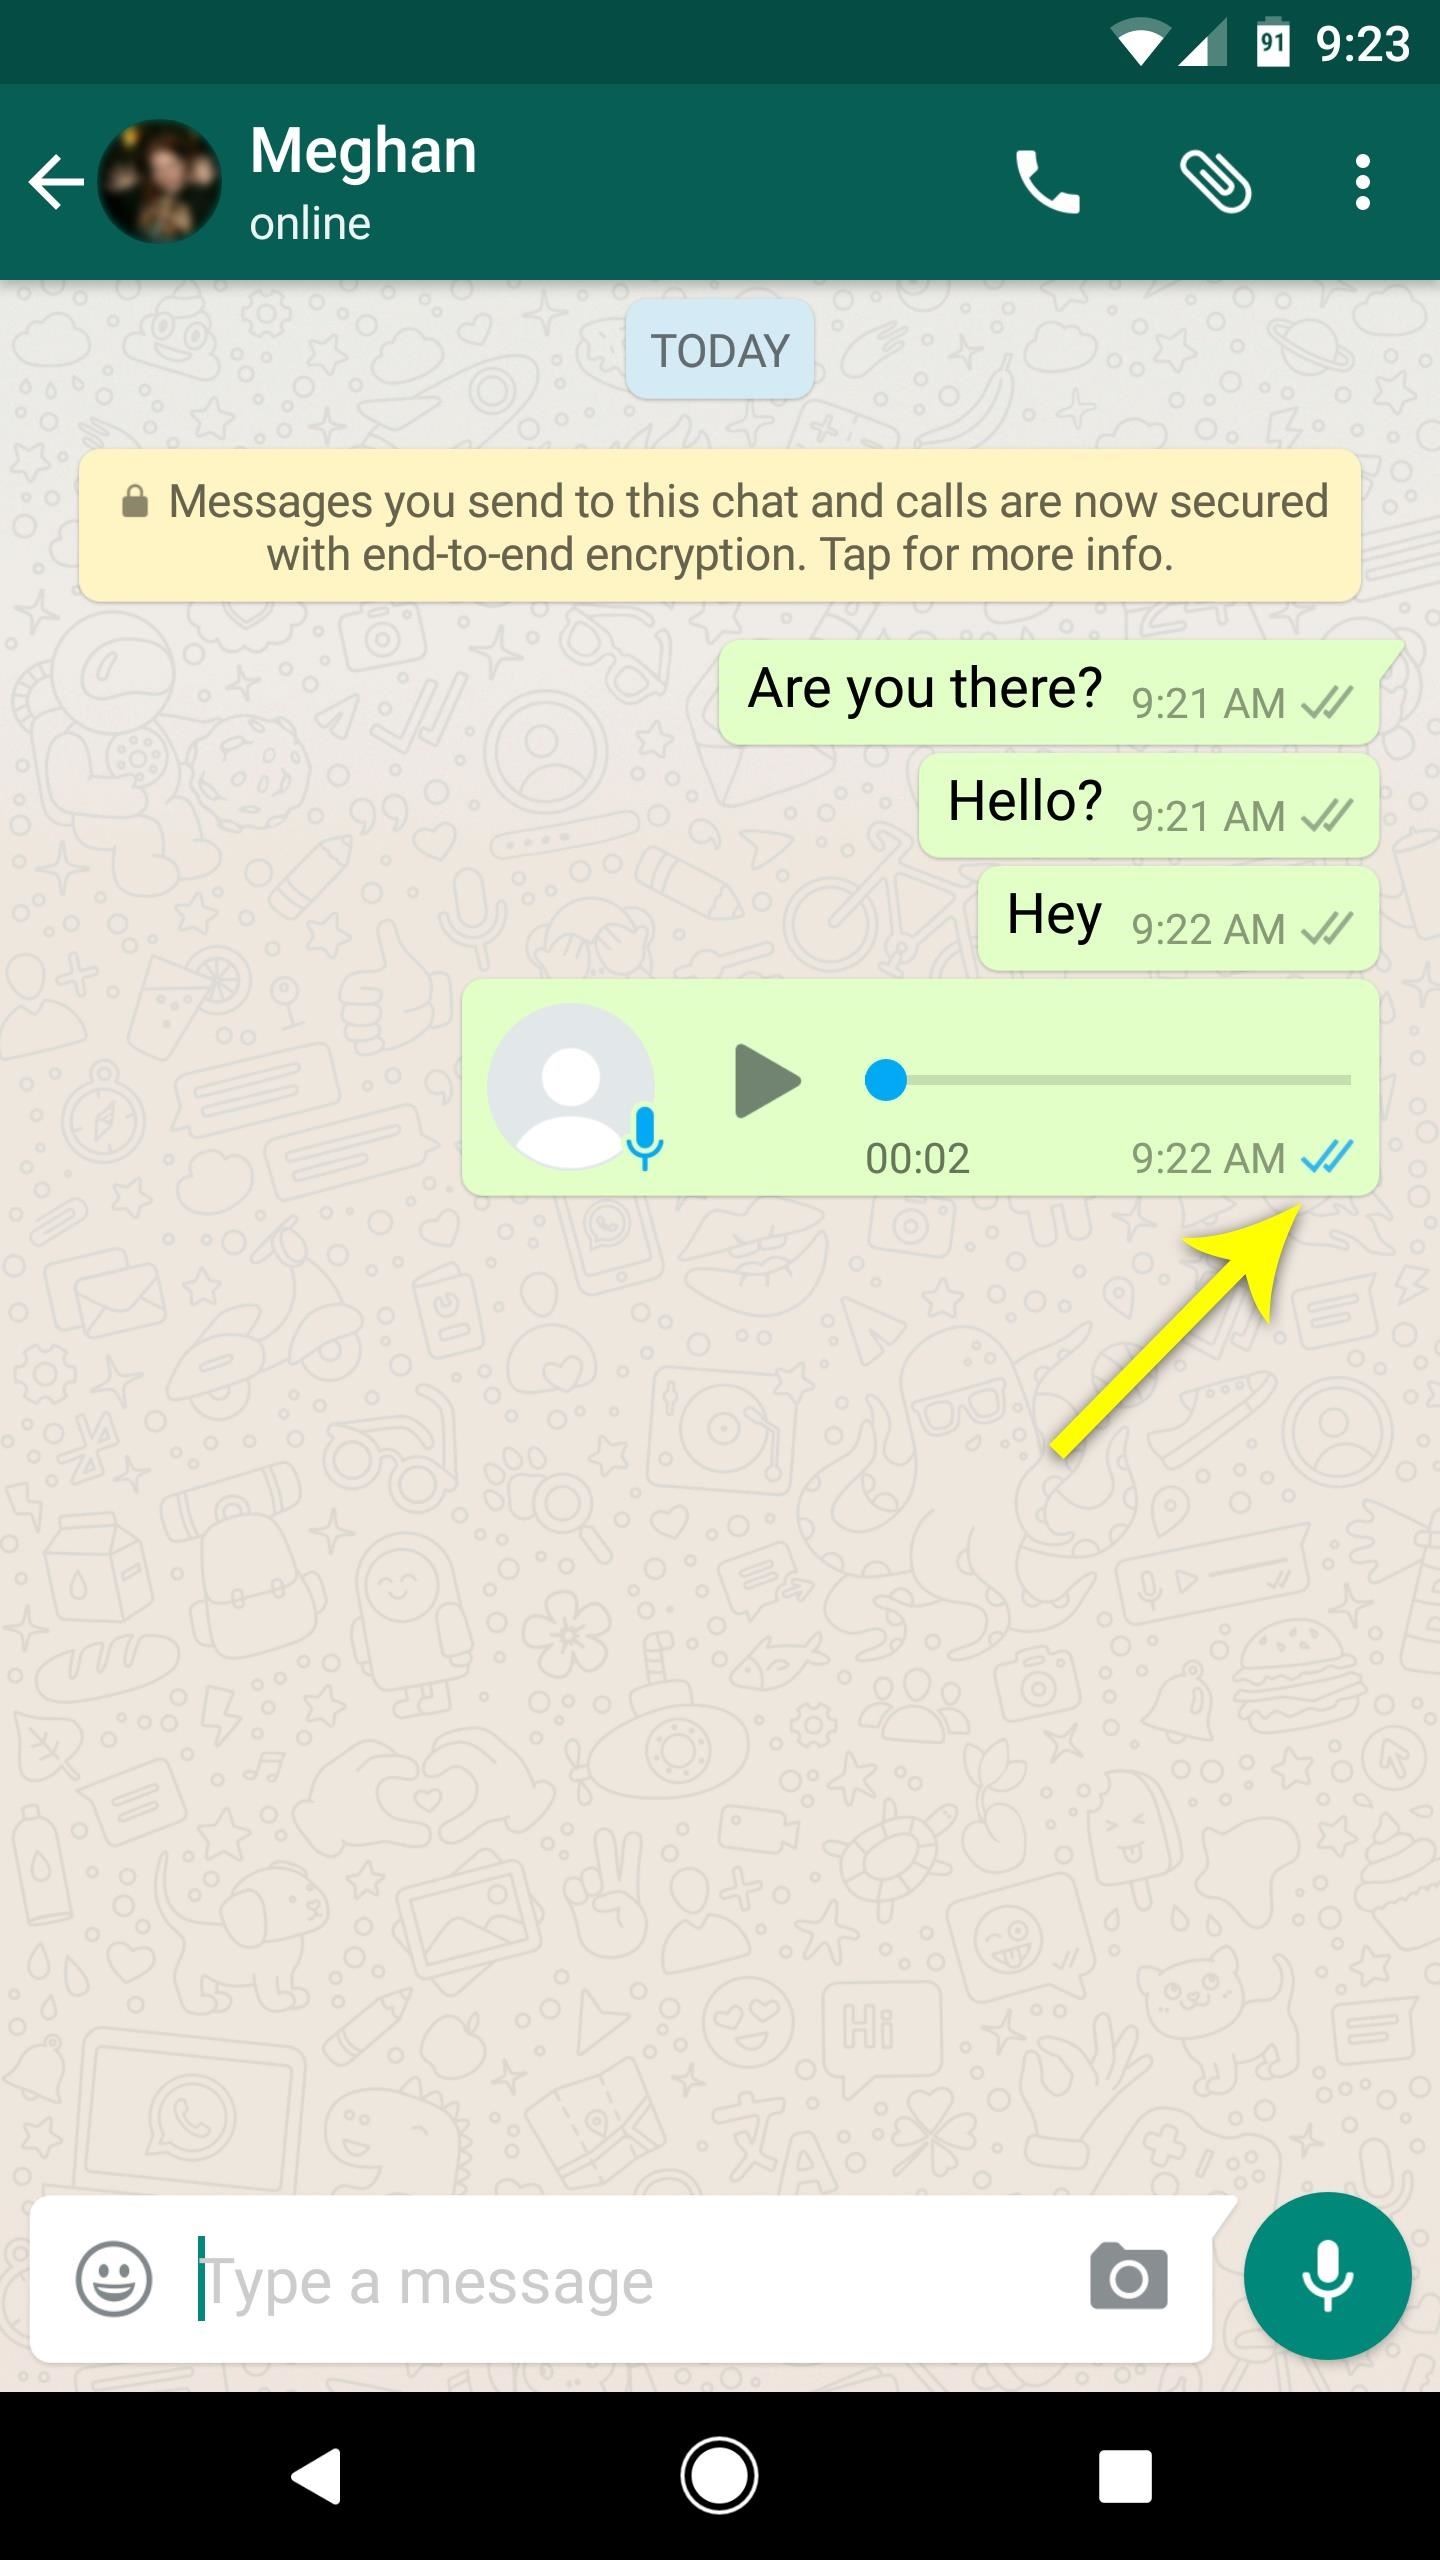 How to Tell if Someone Has Read Your WhatsApp Message—Even if They Have Read Receipts Turned Off